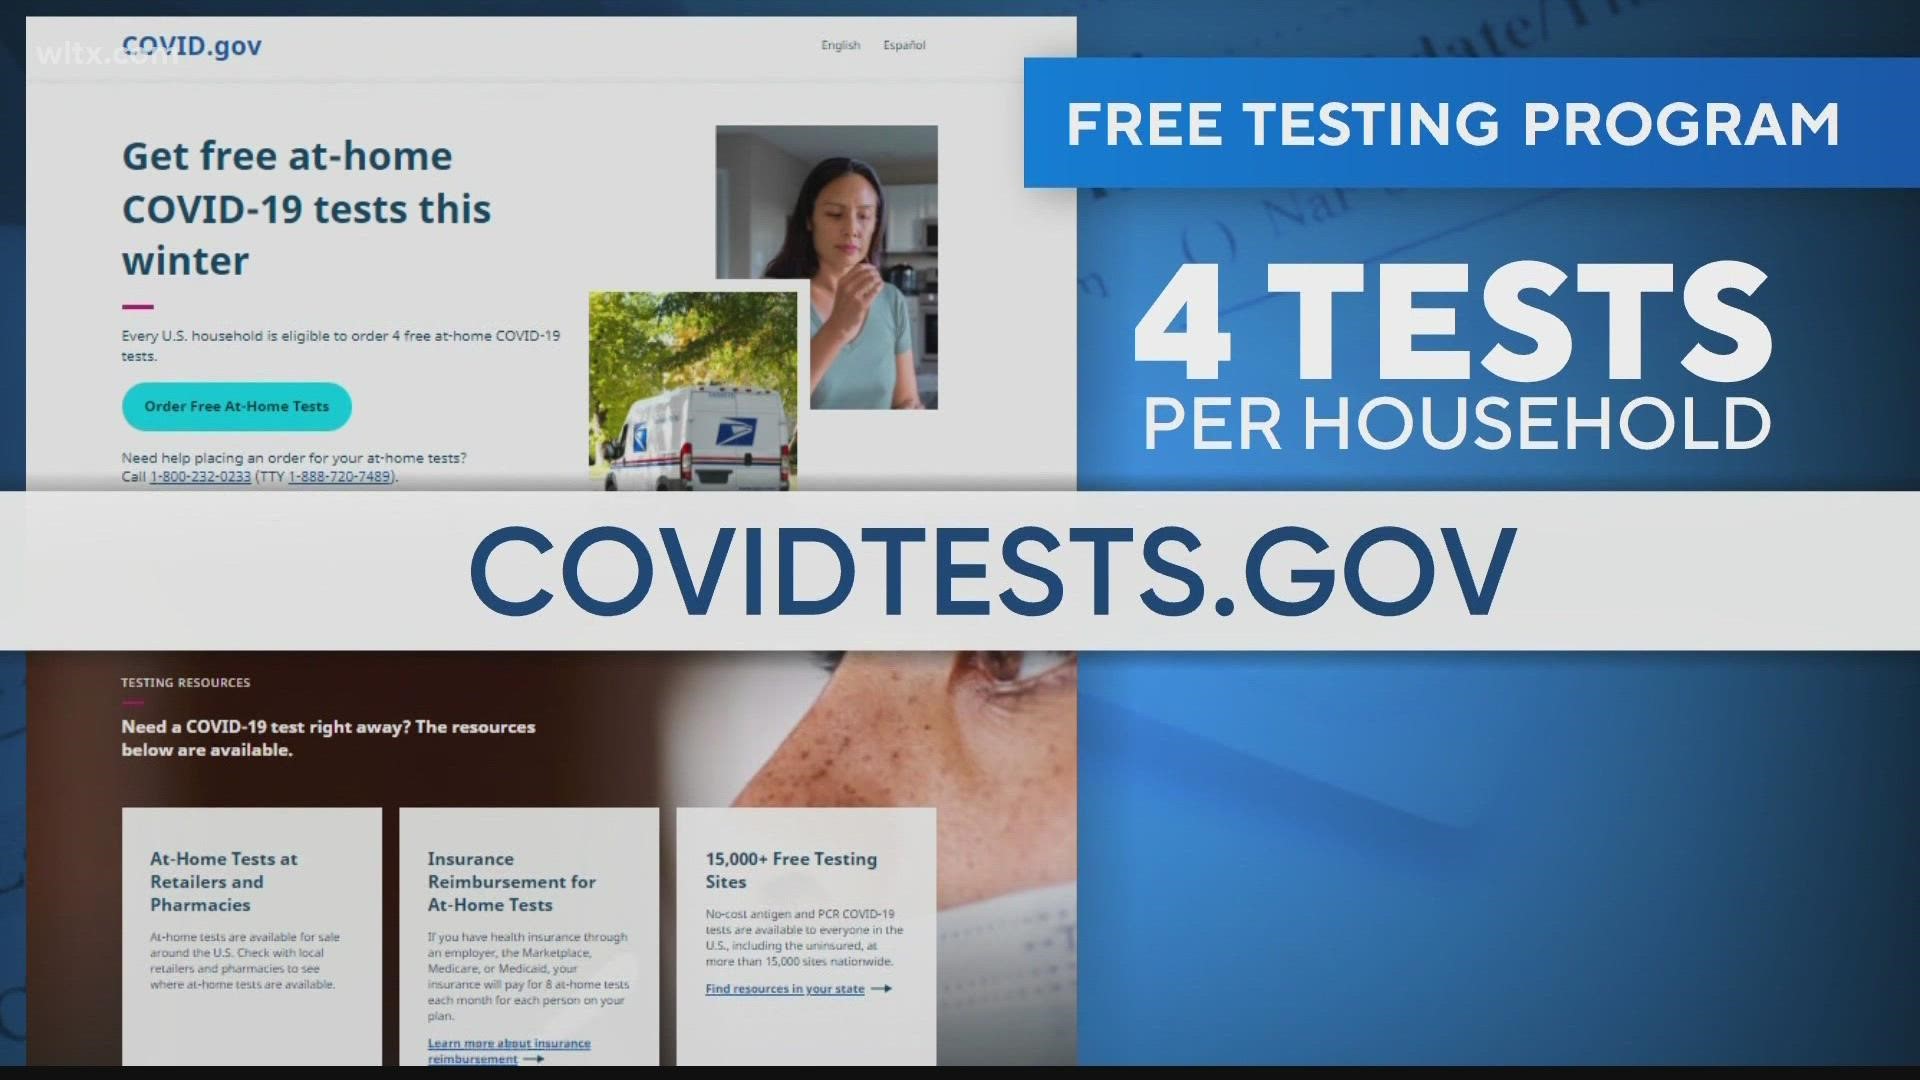 The Biden administration is again making some free COVID-19 tests available to all U.S. households as it plans for potential coronavirus surges this winter.